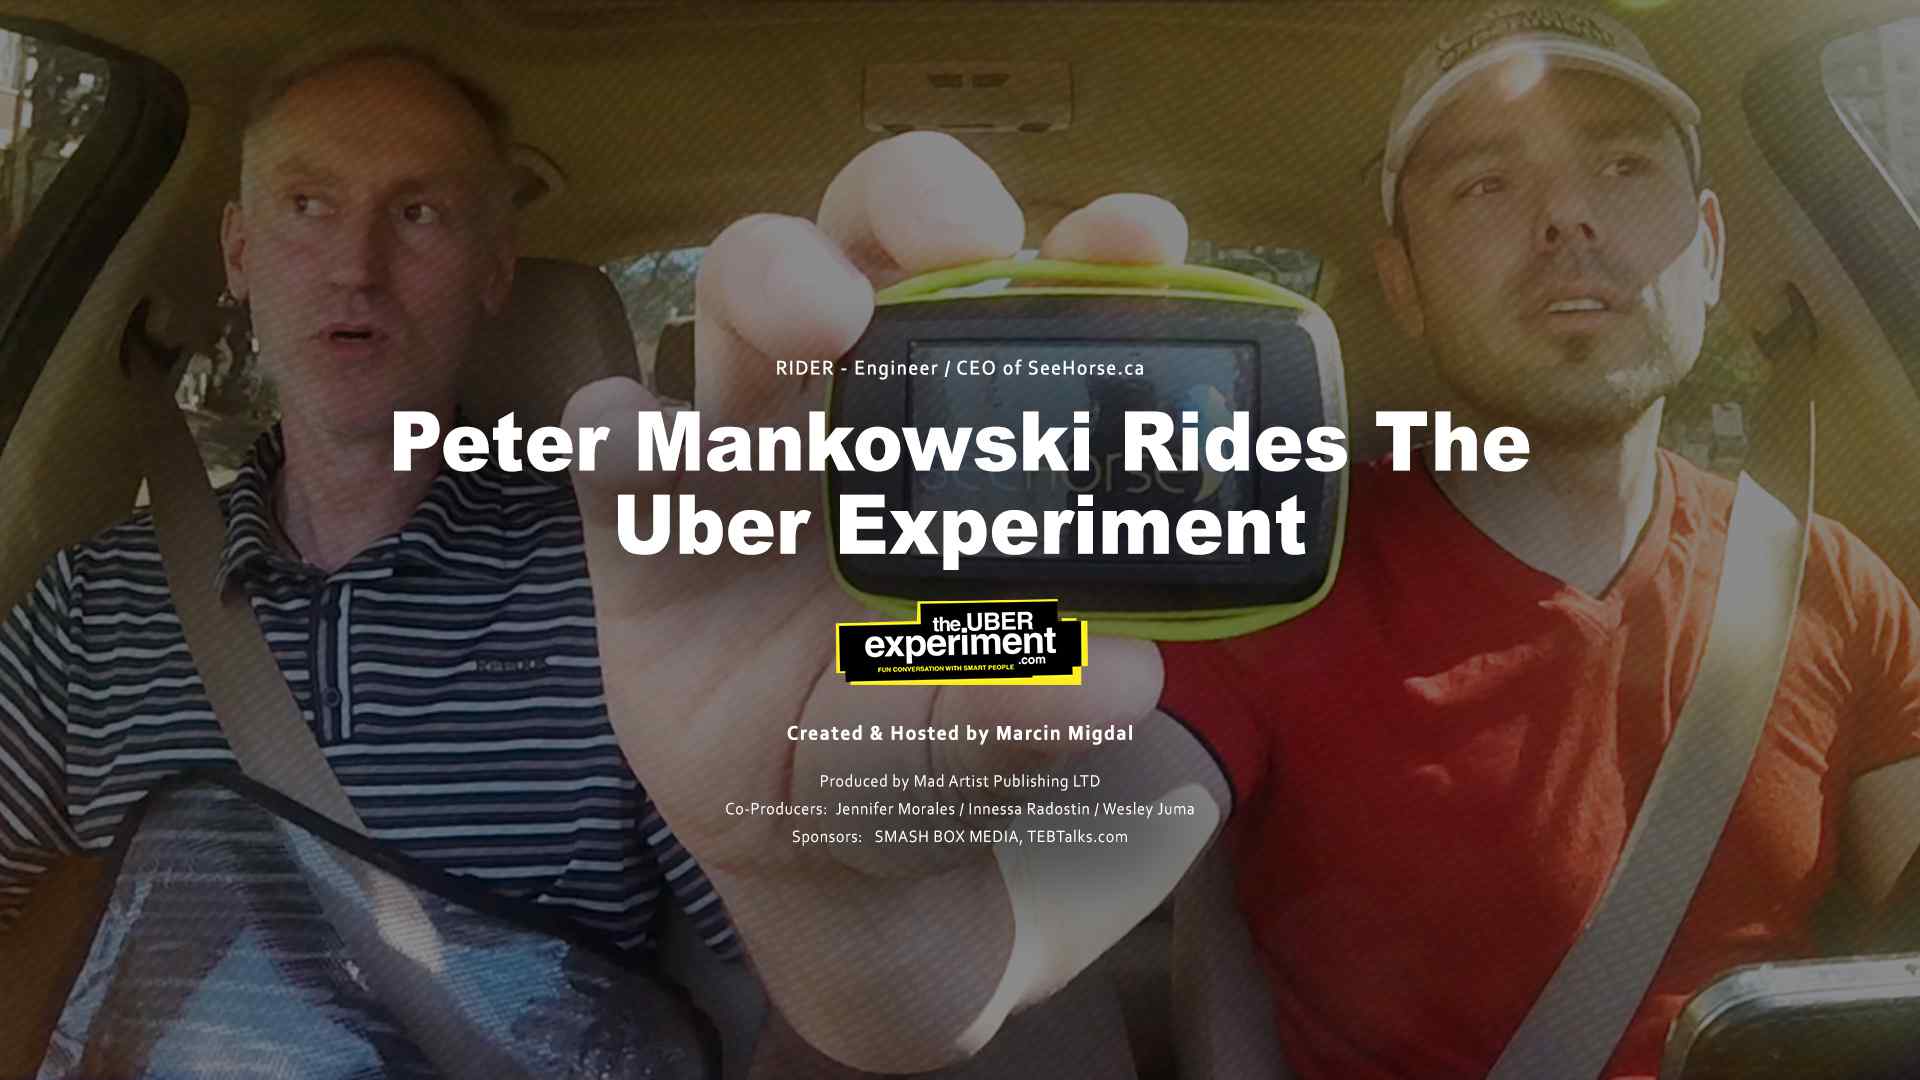 SeeHorse.ca CEO Peter Mankowski rides The UBER Experiment Reality Show